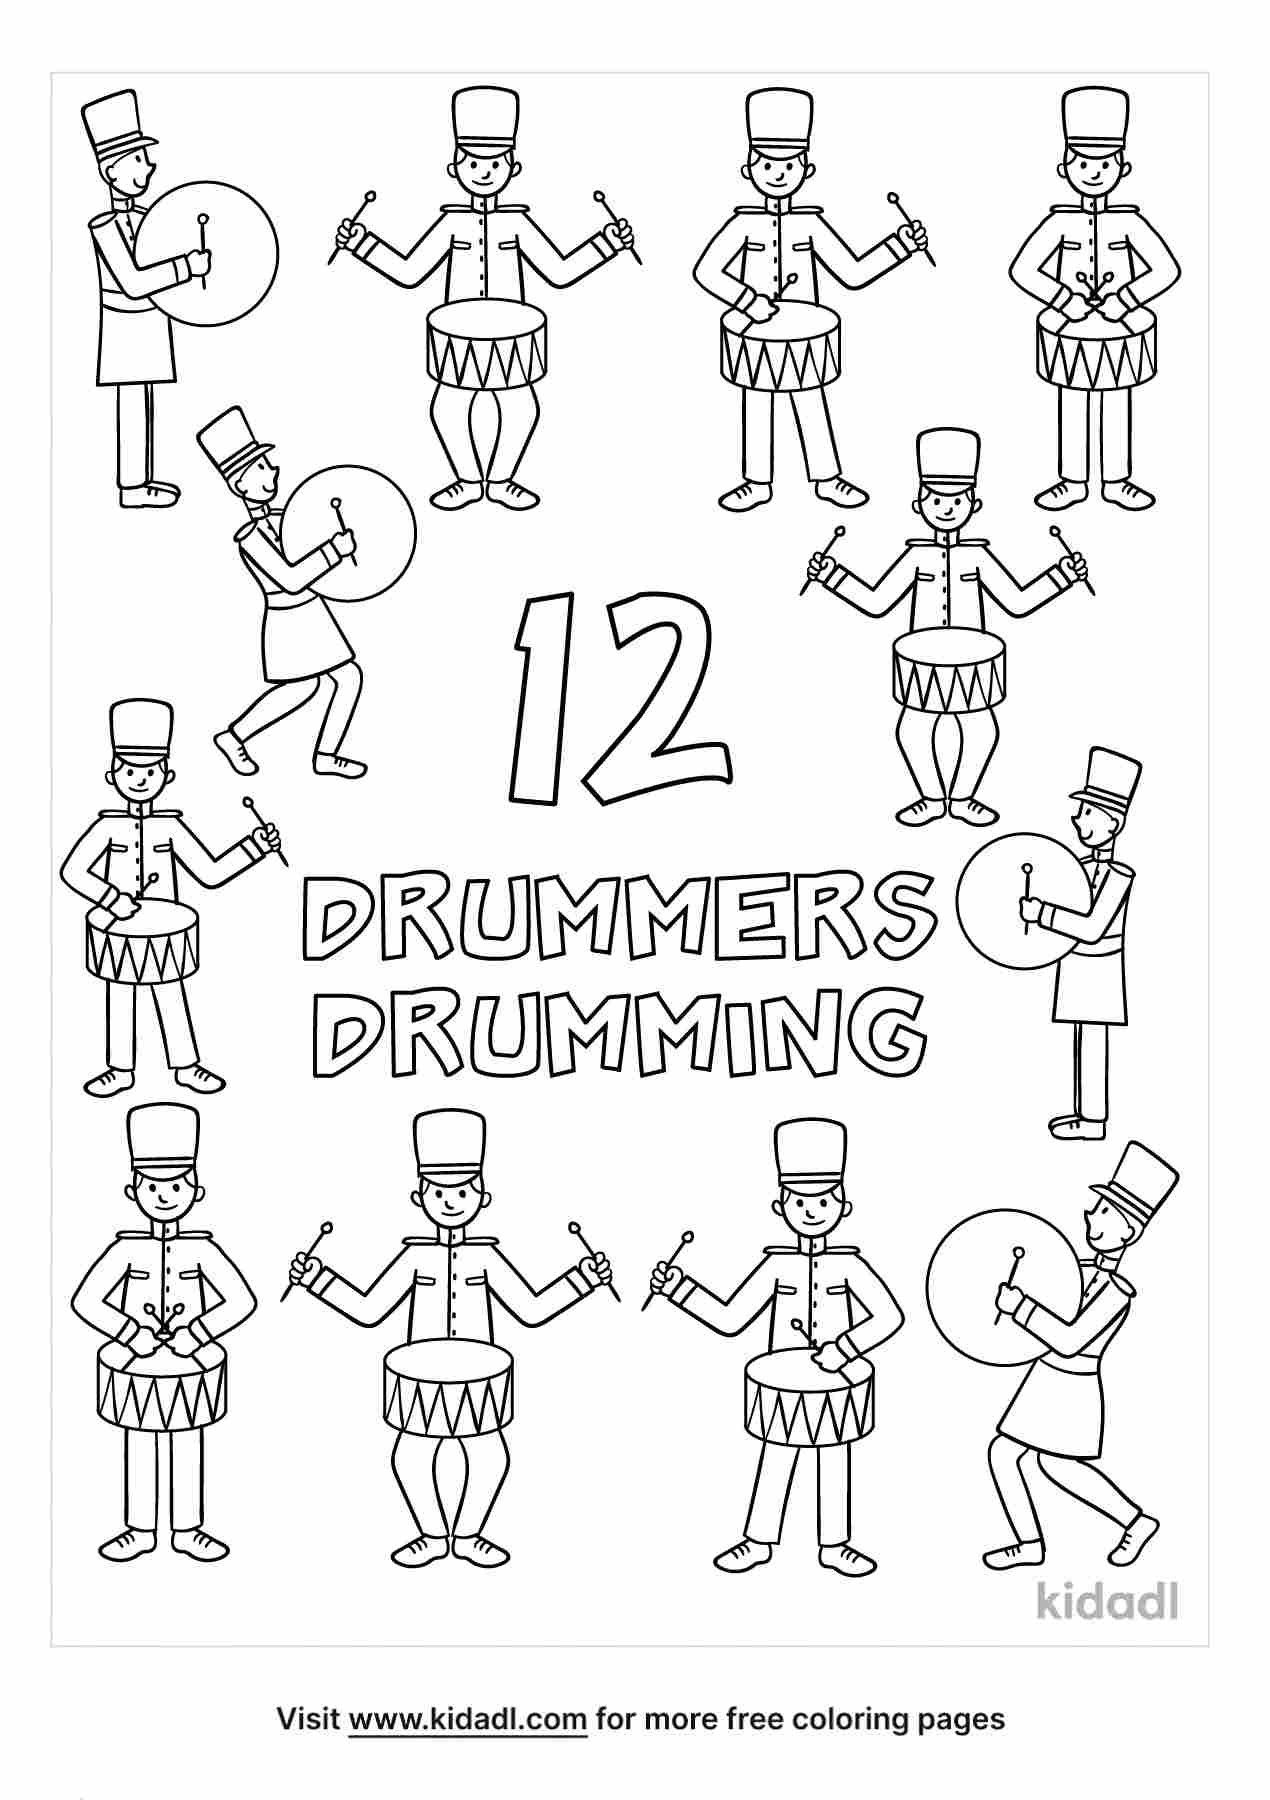 featuring about the drummers drumming fact